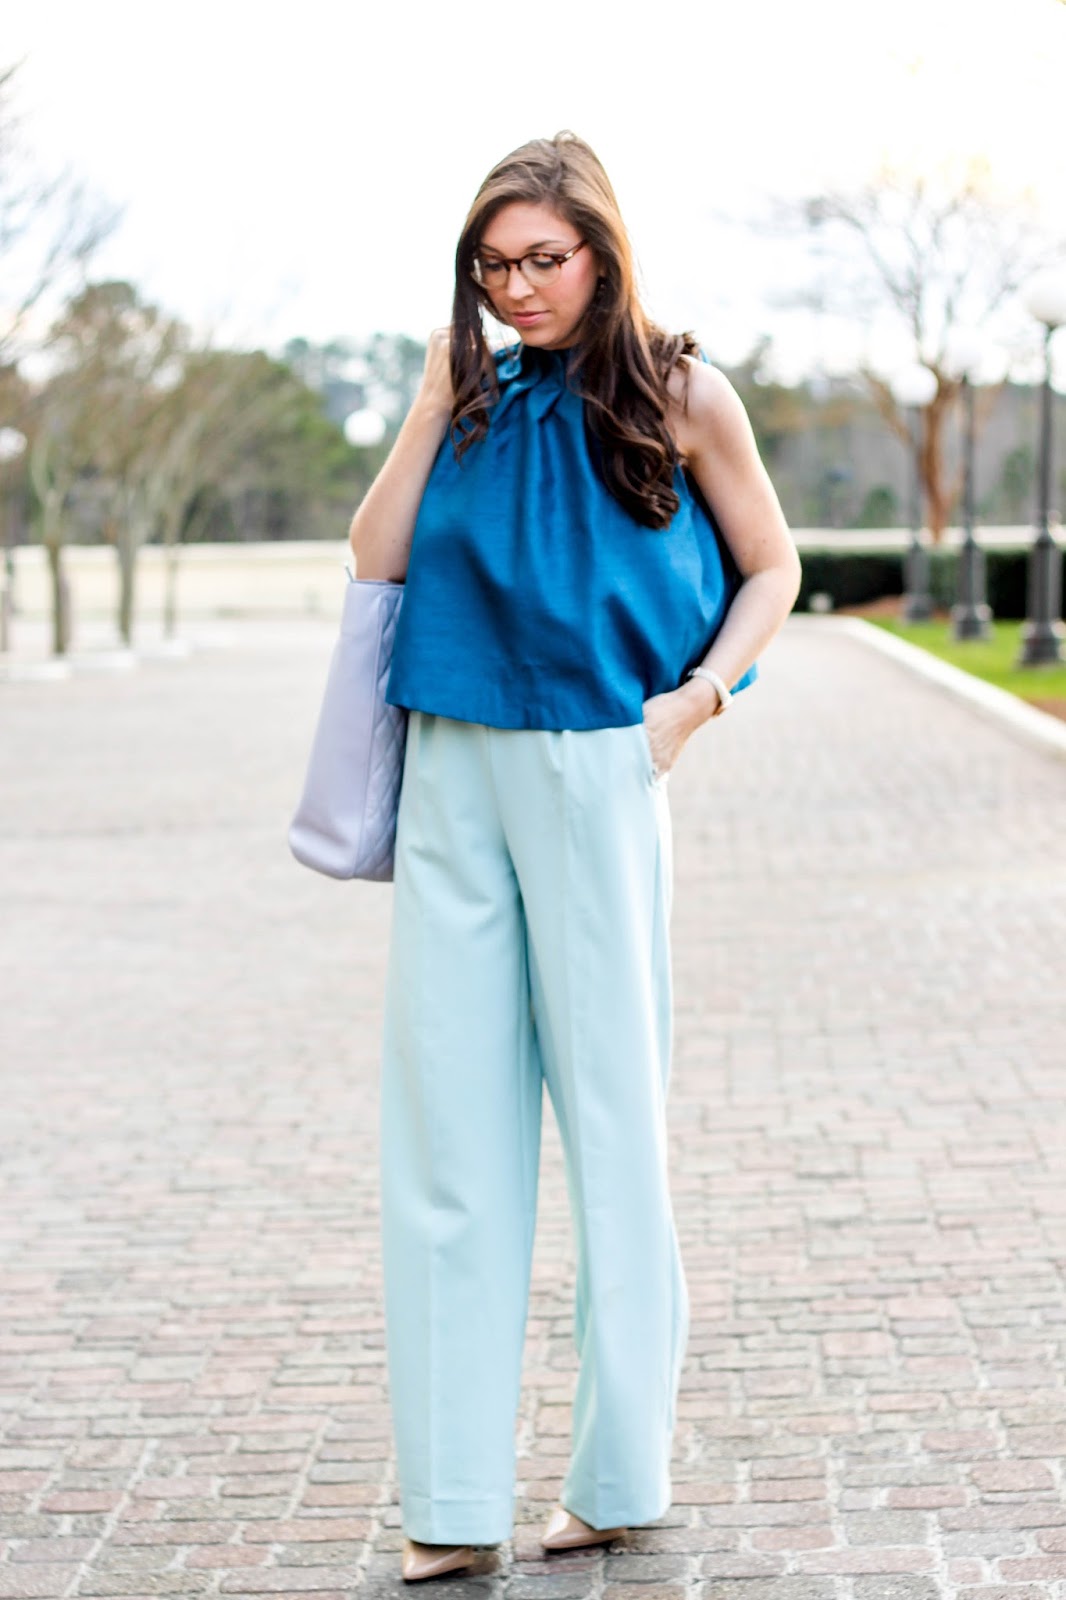 C/Meo Make Way Top Revolve Clothing, ASOS Wide Leg Pants, Mint wide leg pants, wide-leg pants in mint, Fossil tailor multifunction light brown leather watch, Tan leather watch with rose gold, Nude Pointy Toe Pumps, Nude Heels, Cloud Grey Tote, Vera Bradley Tote, Spring Trends, Blue Outfit, Spring Outfit Idea, Create and Cultivate Conference, Raleigh Blogger, NC blogger, fashion blogger, tortoise glasses under $100, stella dot earrings, stella dot jewelry, sophisticated chic outfit, pretty in the pines blog